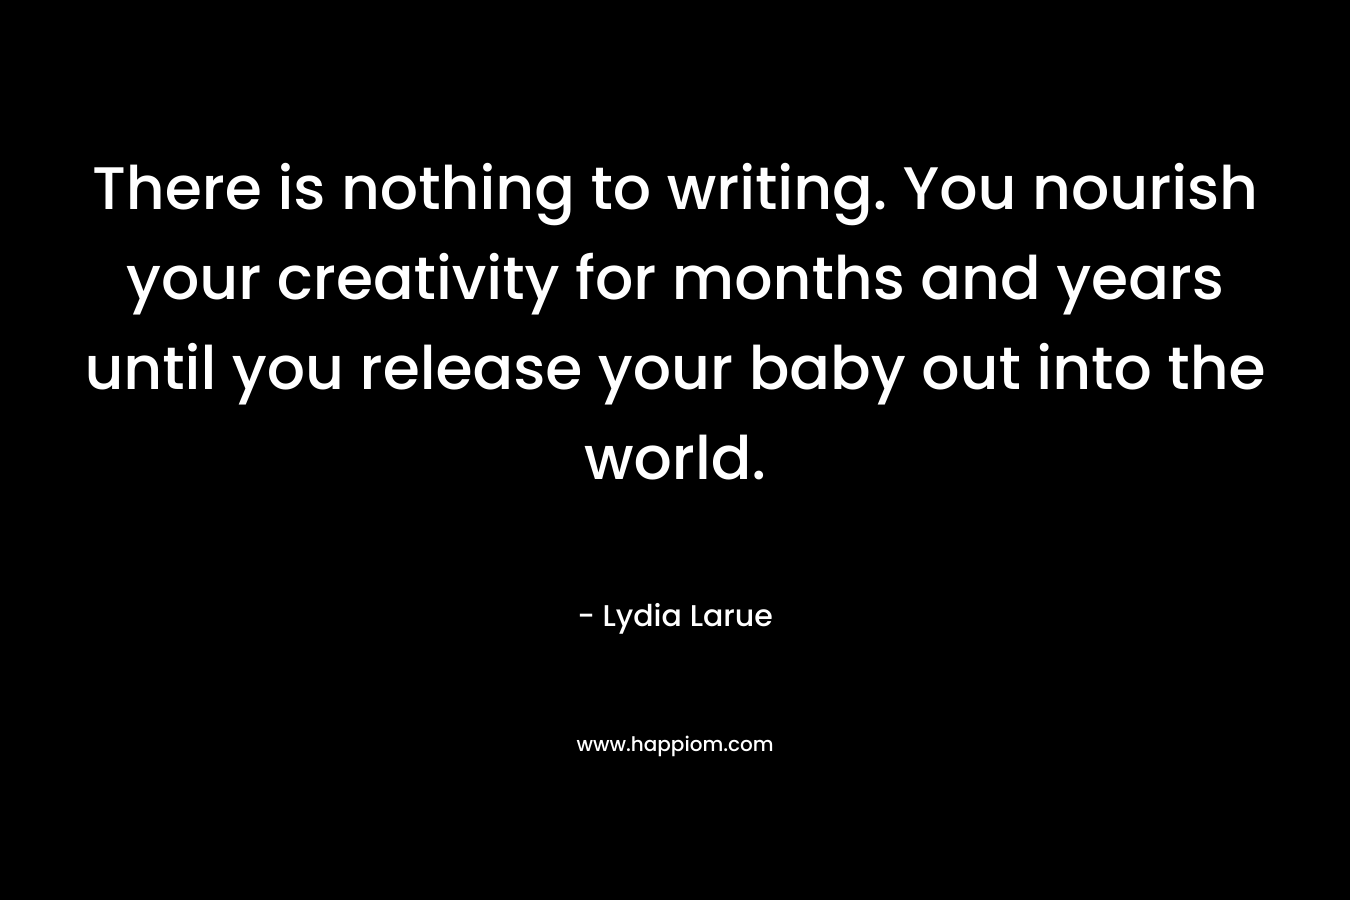 There is nothing to writing. You nourish your creativity for months and years until you release your baby out into the world.